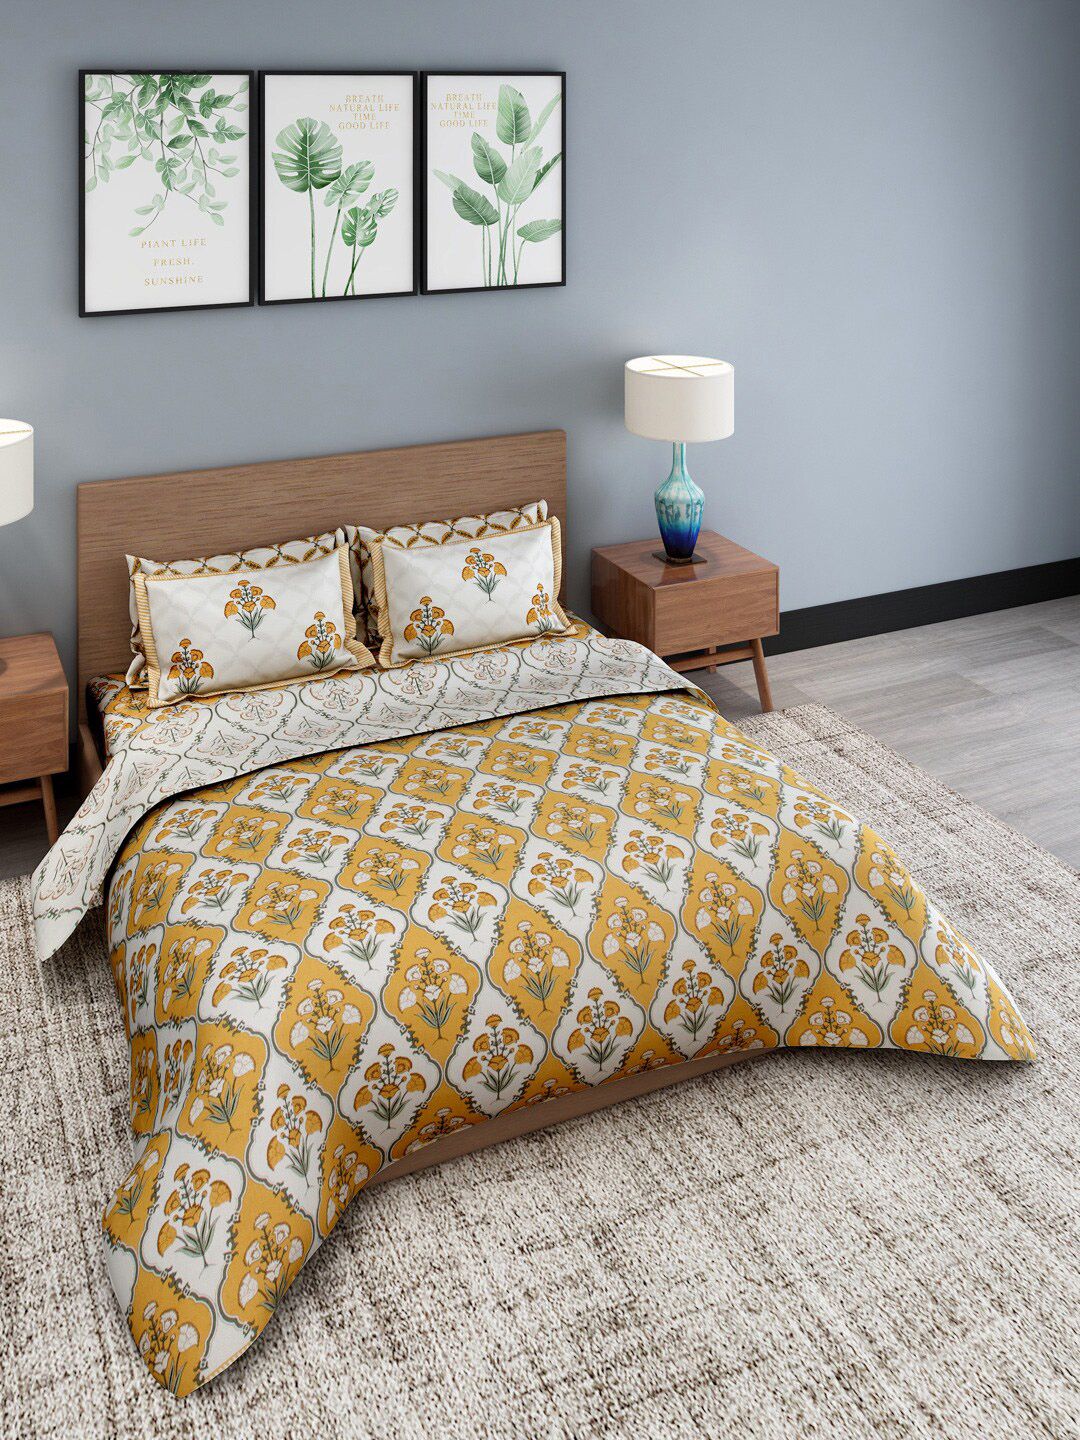 Rajasthan Decor Set Of 4 Mustard & White Printed Cotton Double Bedding Set With Pillow Covers & Comforter Price in India